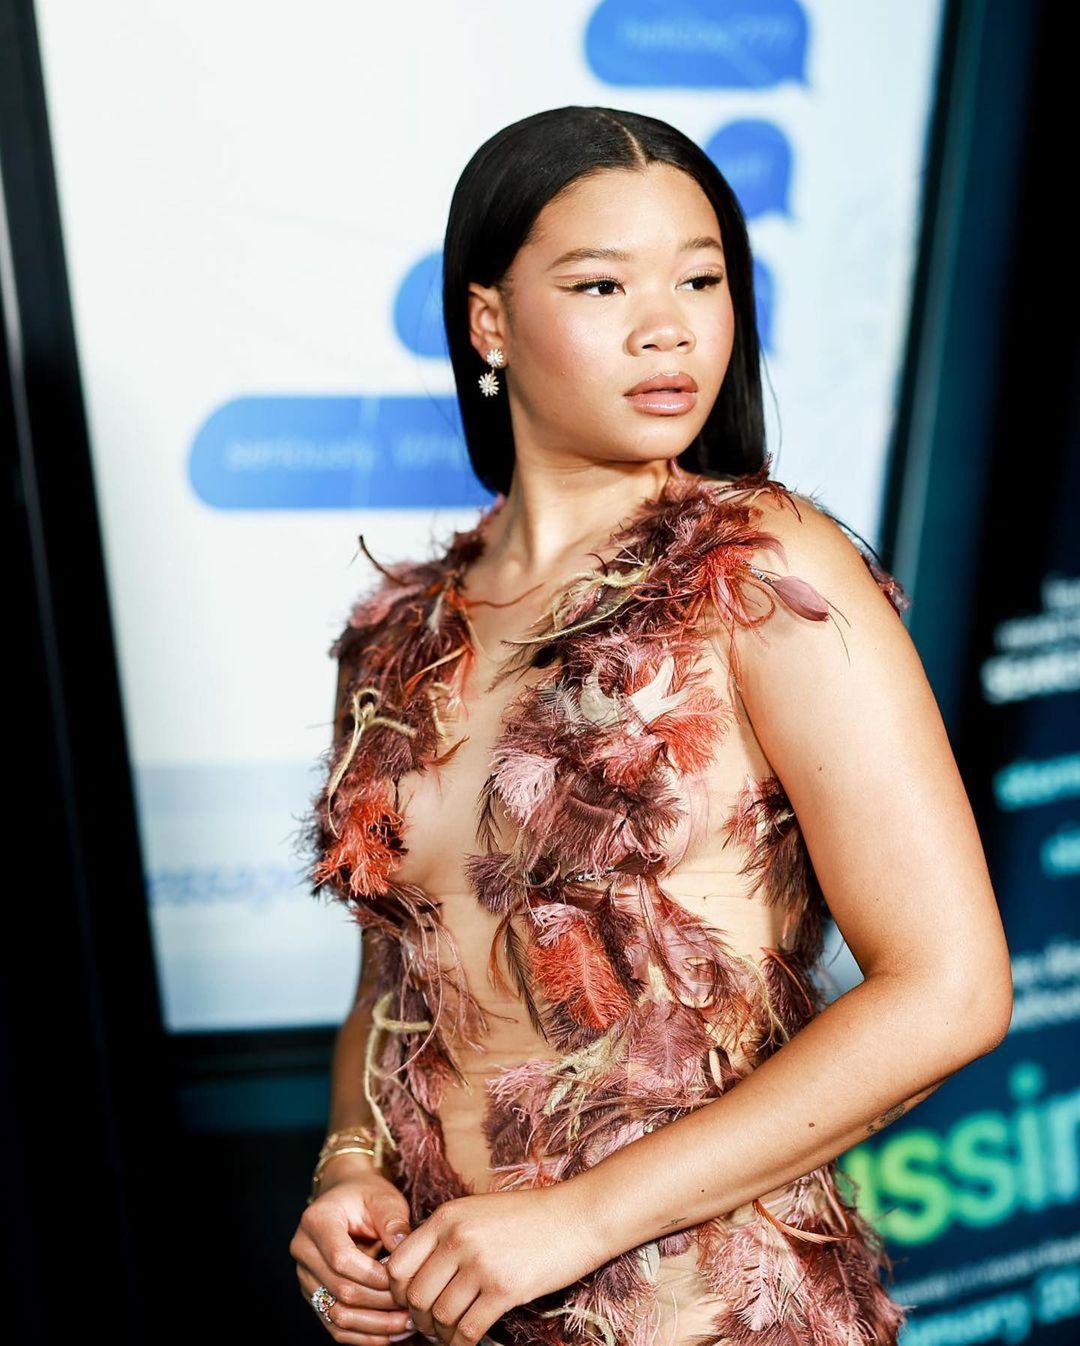 Fashion Bomb Couple Storm Reid and Shedeur Sanders Attended the Premiere Missing Wearing Balmain and Gucci1